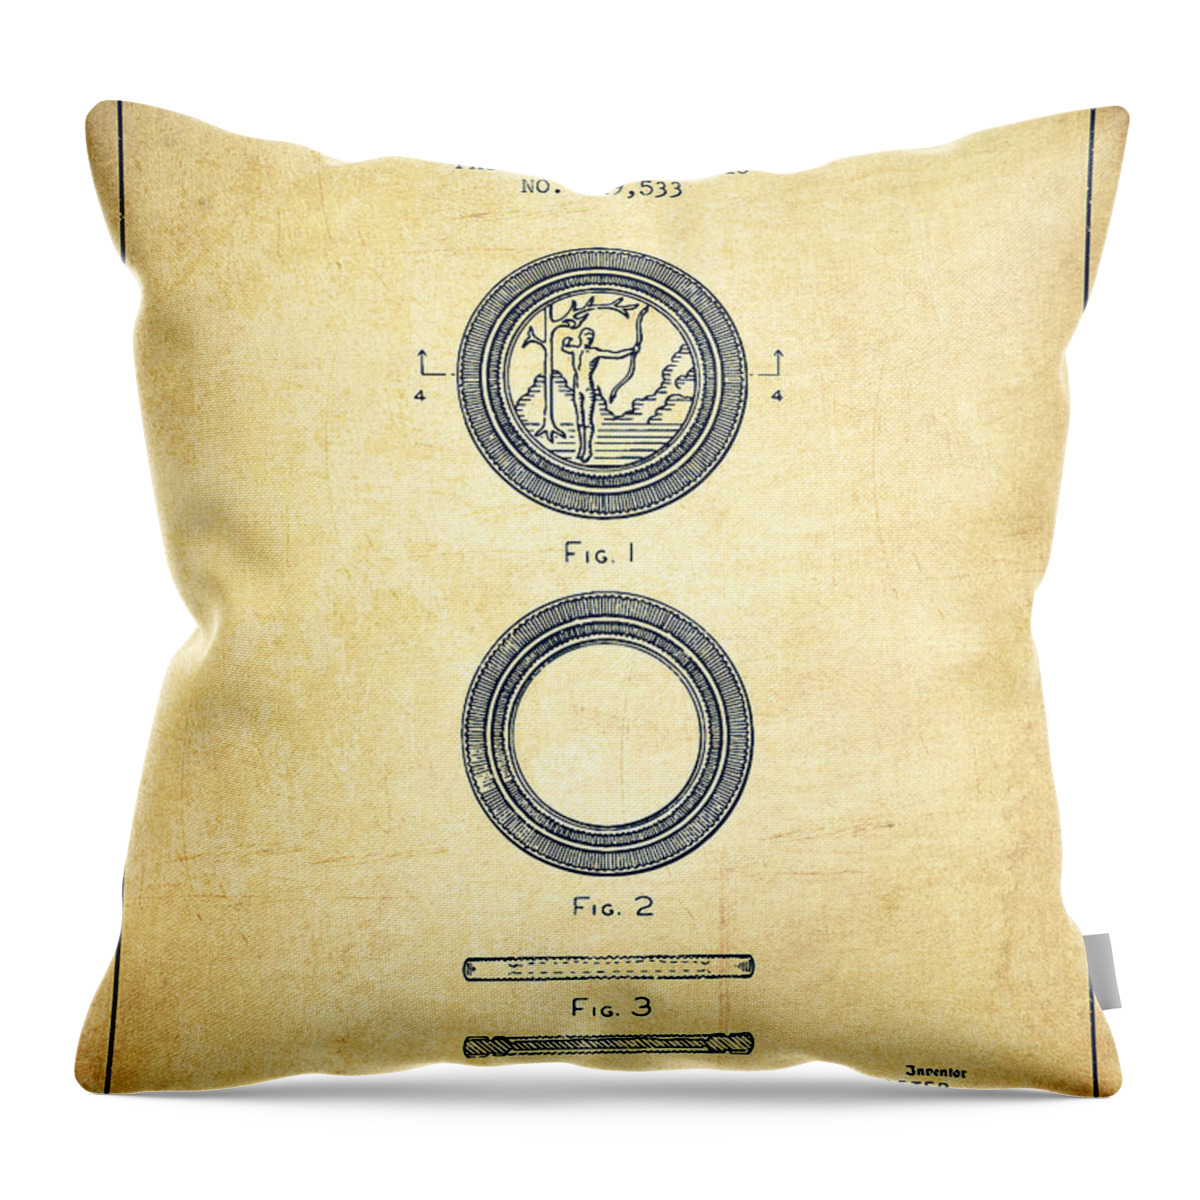 Poker Throw Pillow featuring the digital art Poker Chip Patent from 1948 - Vintage by Aged Pixel